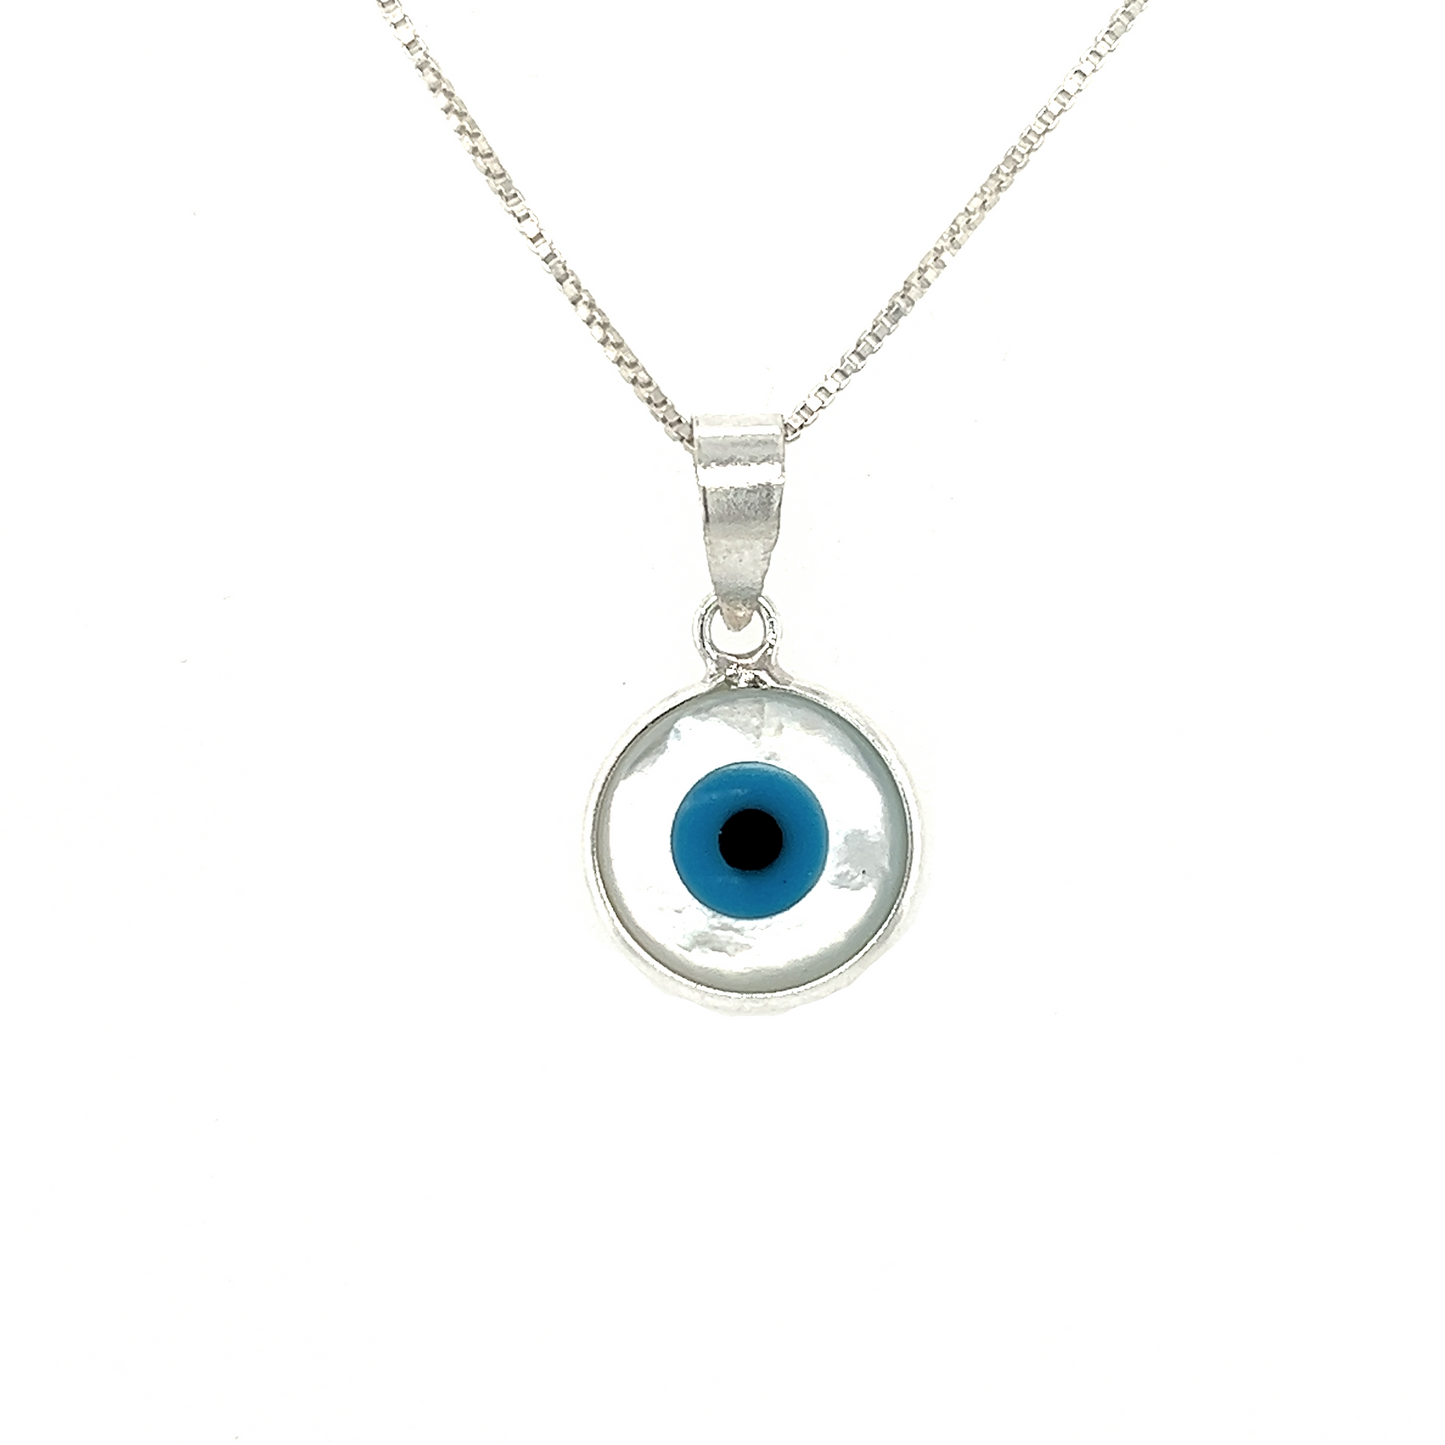 Mother of Pearl Evil Eye Charms on a silver chain, providing protection.